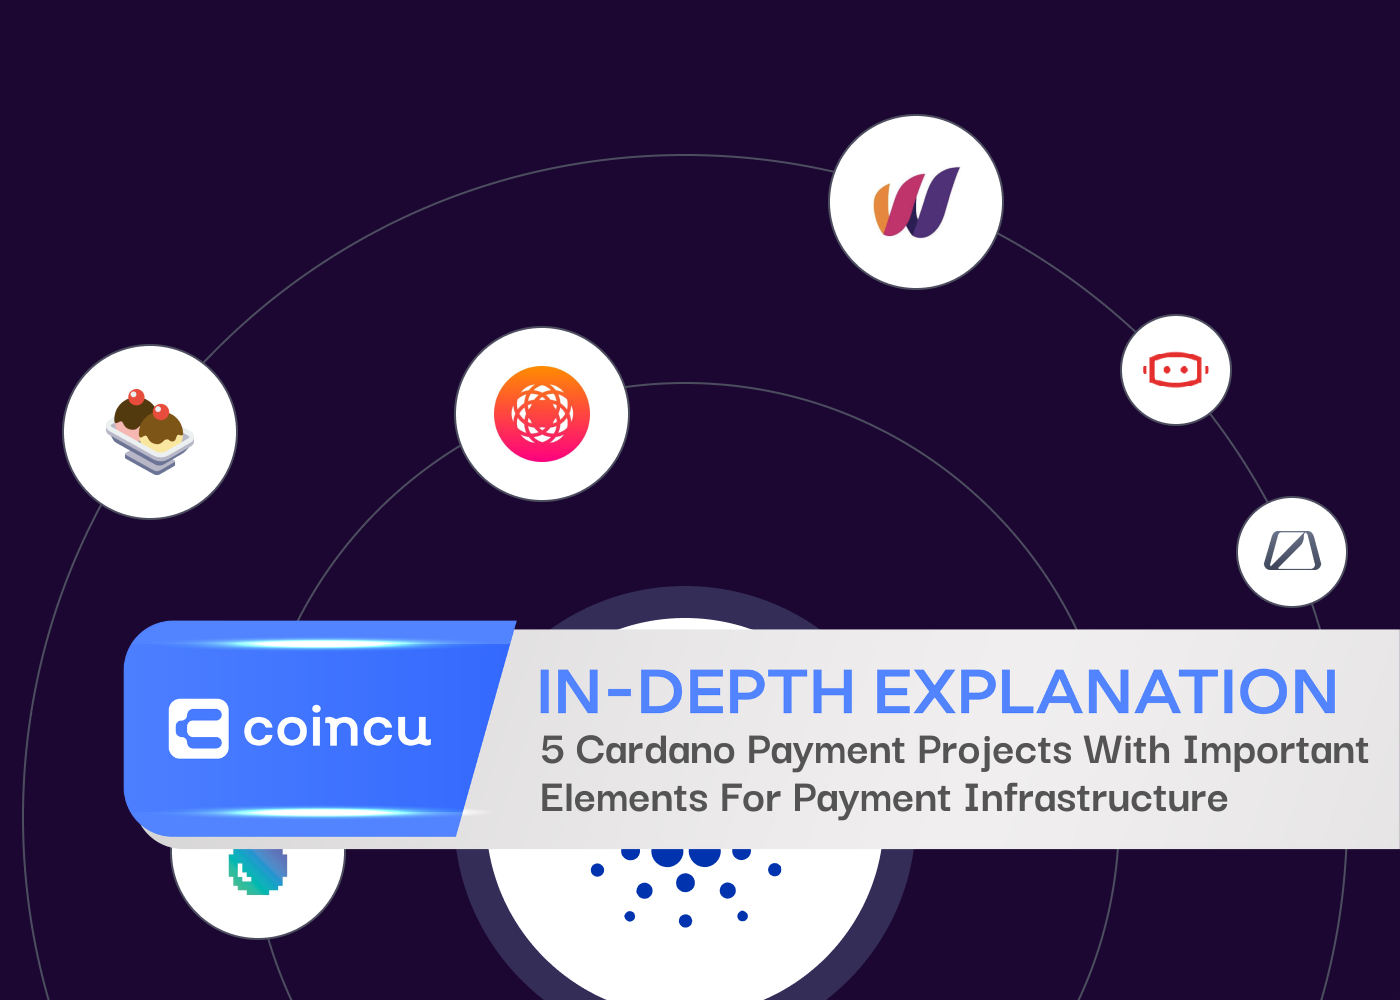 5 Cardano Payment Projects With Important Elements For Payment Infrastructure